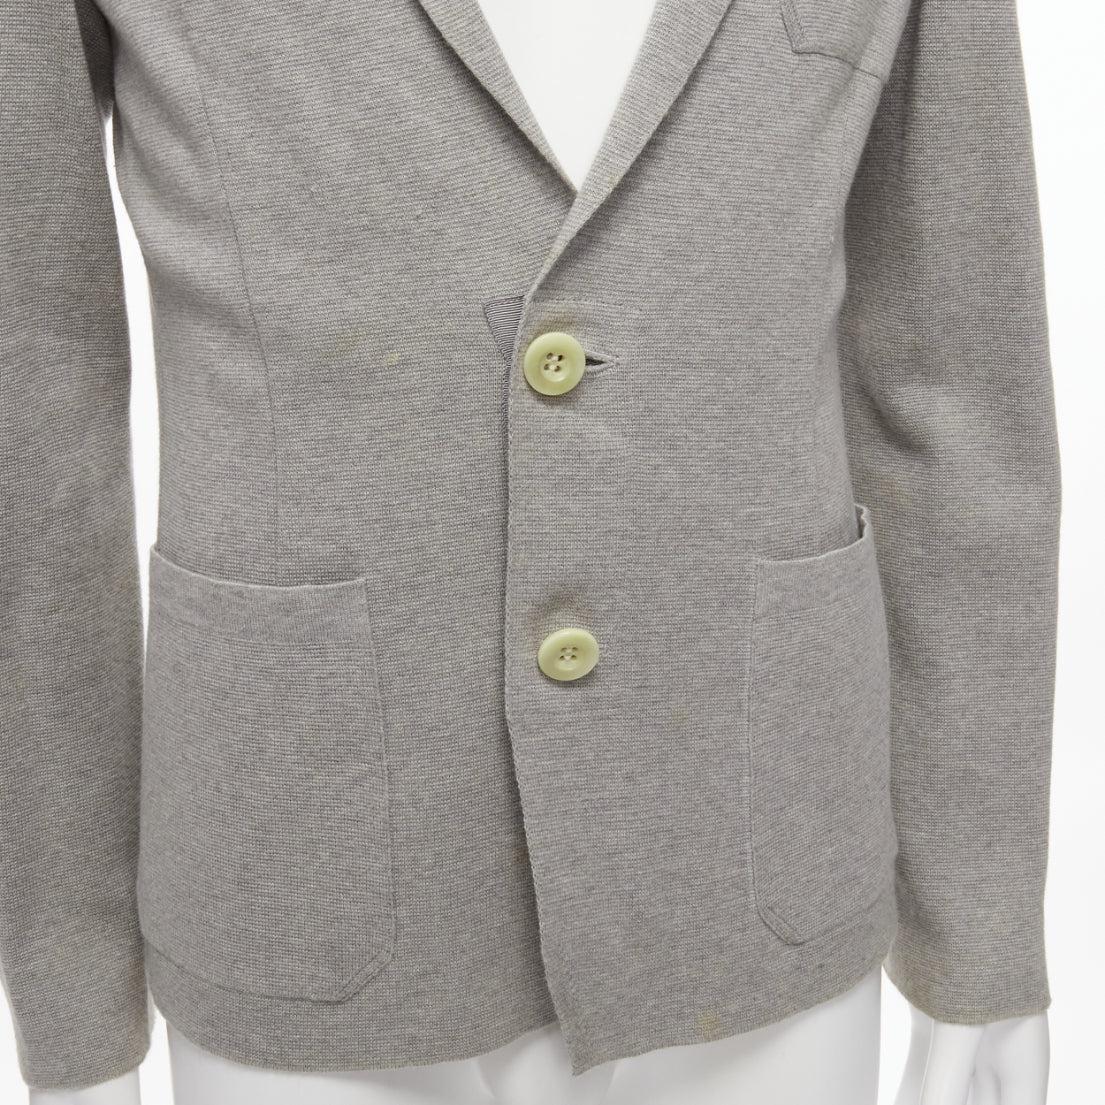 SACAI 2015 light grey cotton contrast collar knitted blazer jacket JP2 M
Reference: YNWG/A00185
Brand: Sacai
Designer: Chitose Abe
Collection: 2015
Material: Cotton
Color: Grey
Pattern: Solid
Closure: Button
Extra Details: Contrasting woven detail